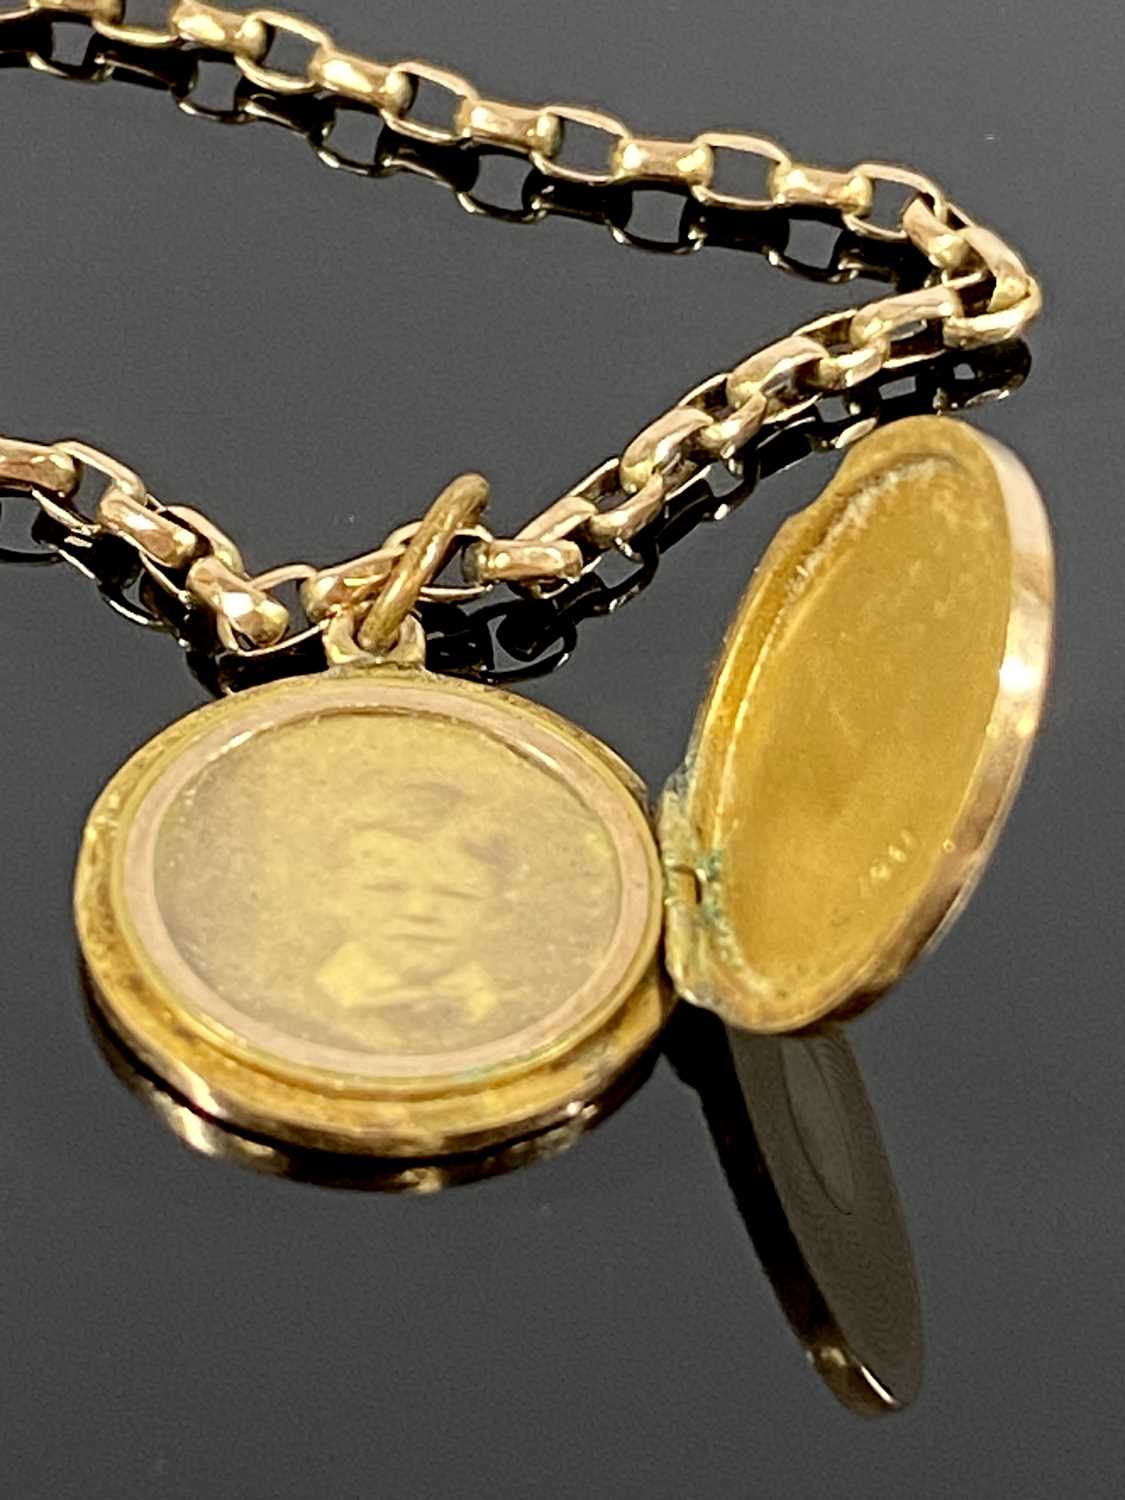 10CT GOLD CIRCULAR LOCKET ON A BELCHER LINK 9CT GOLD NECKLACE, the locket having engine turned - Image 3 of 3